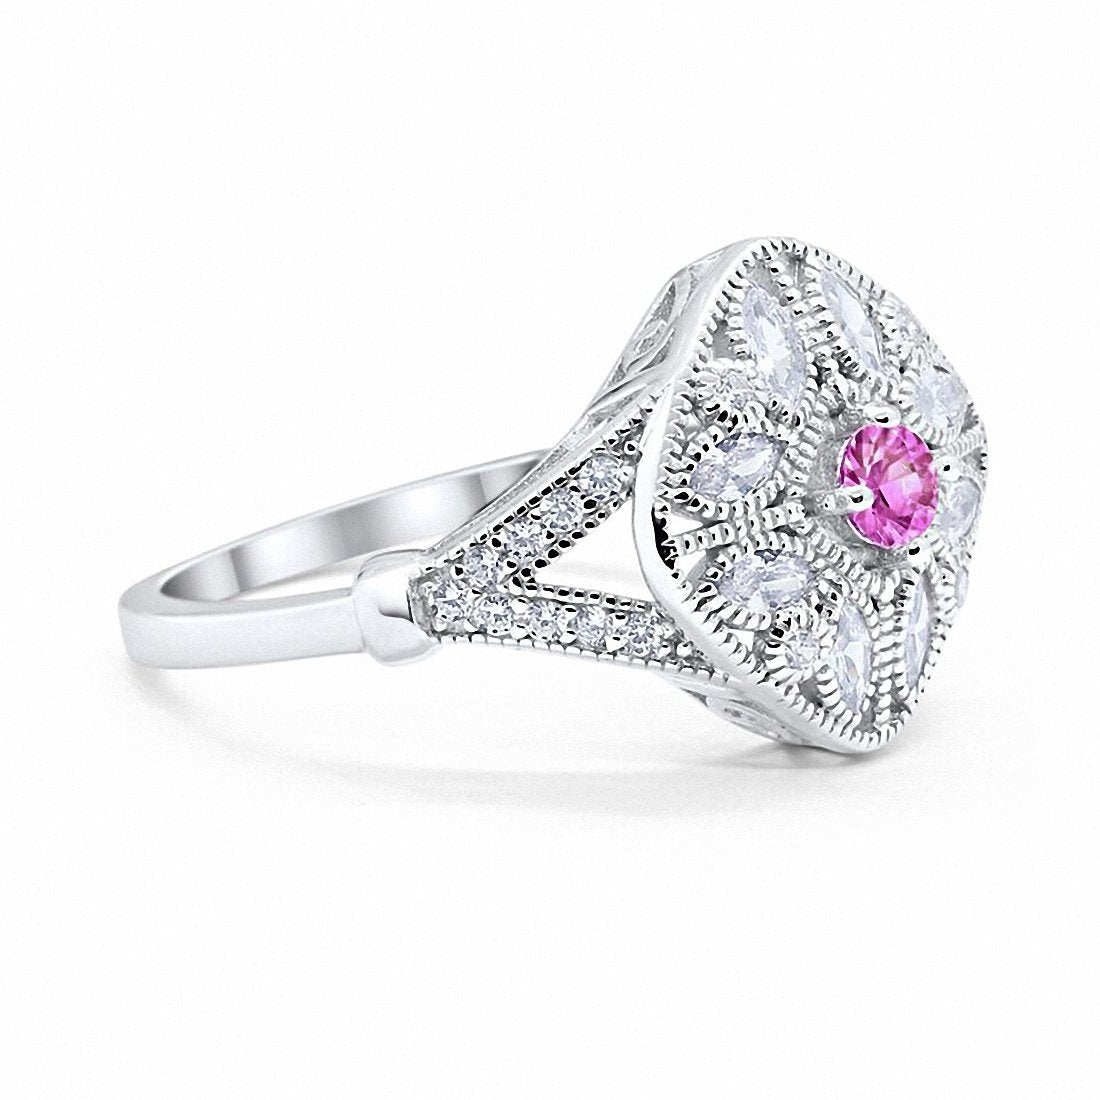 Art Deco Ring Marquise Filigree Simulated Pink CZ 925 Sterling Silver